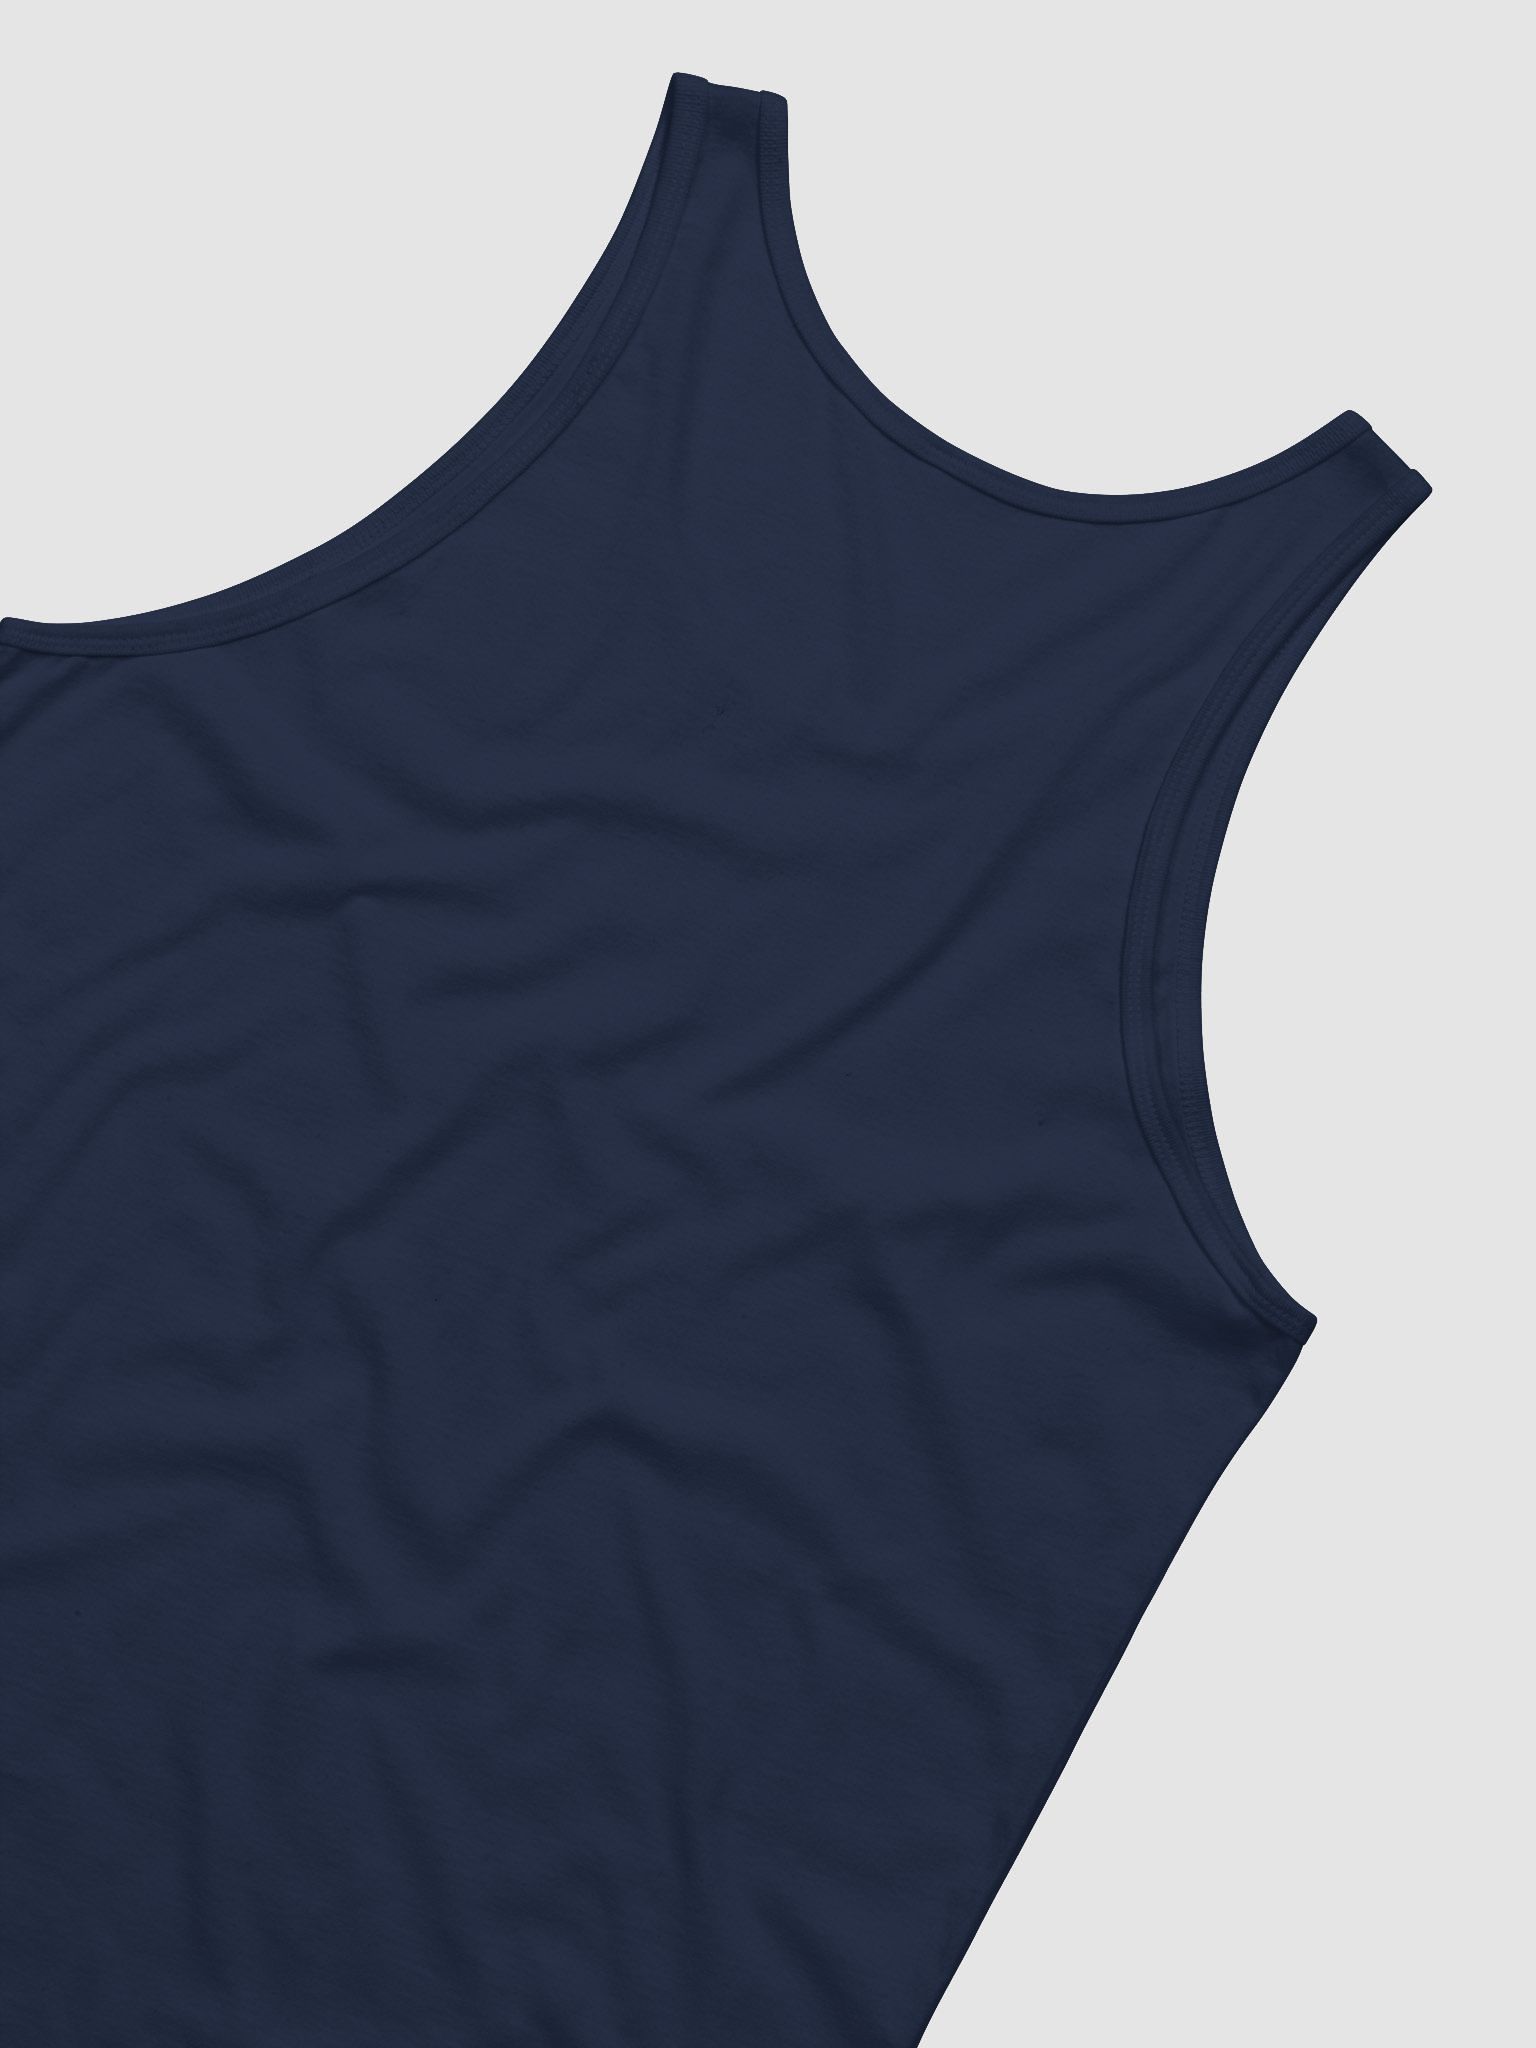 Navy Blue Muscle Tank's Code & Price - RblxTrade